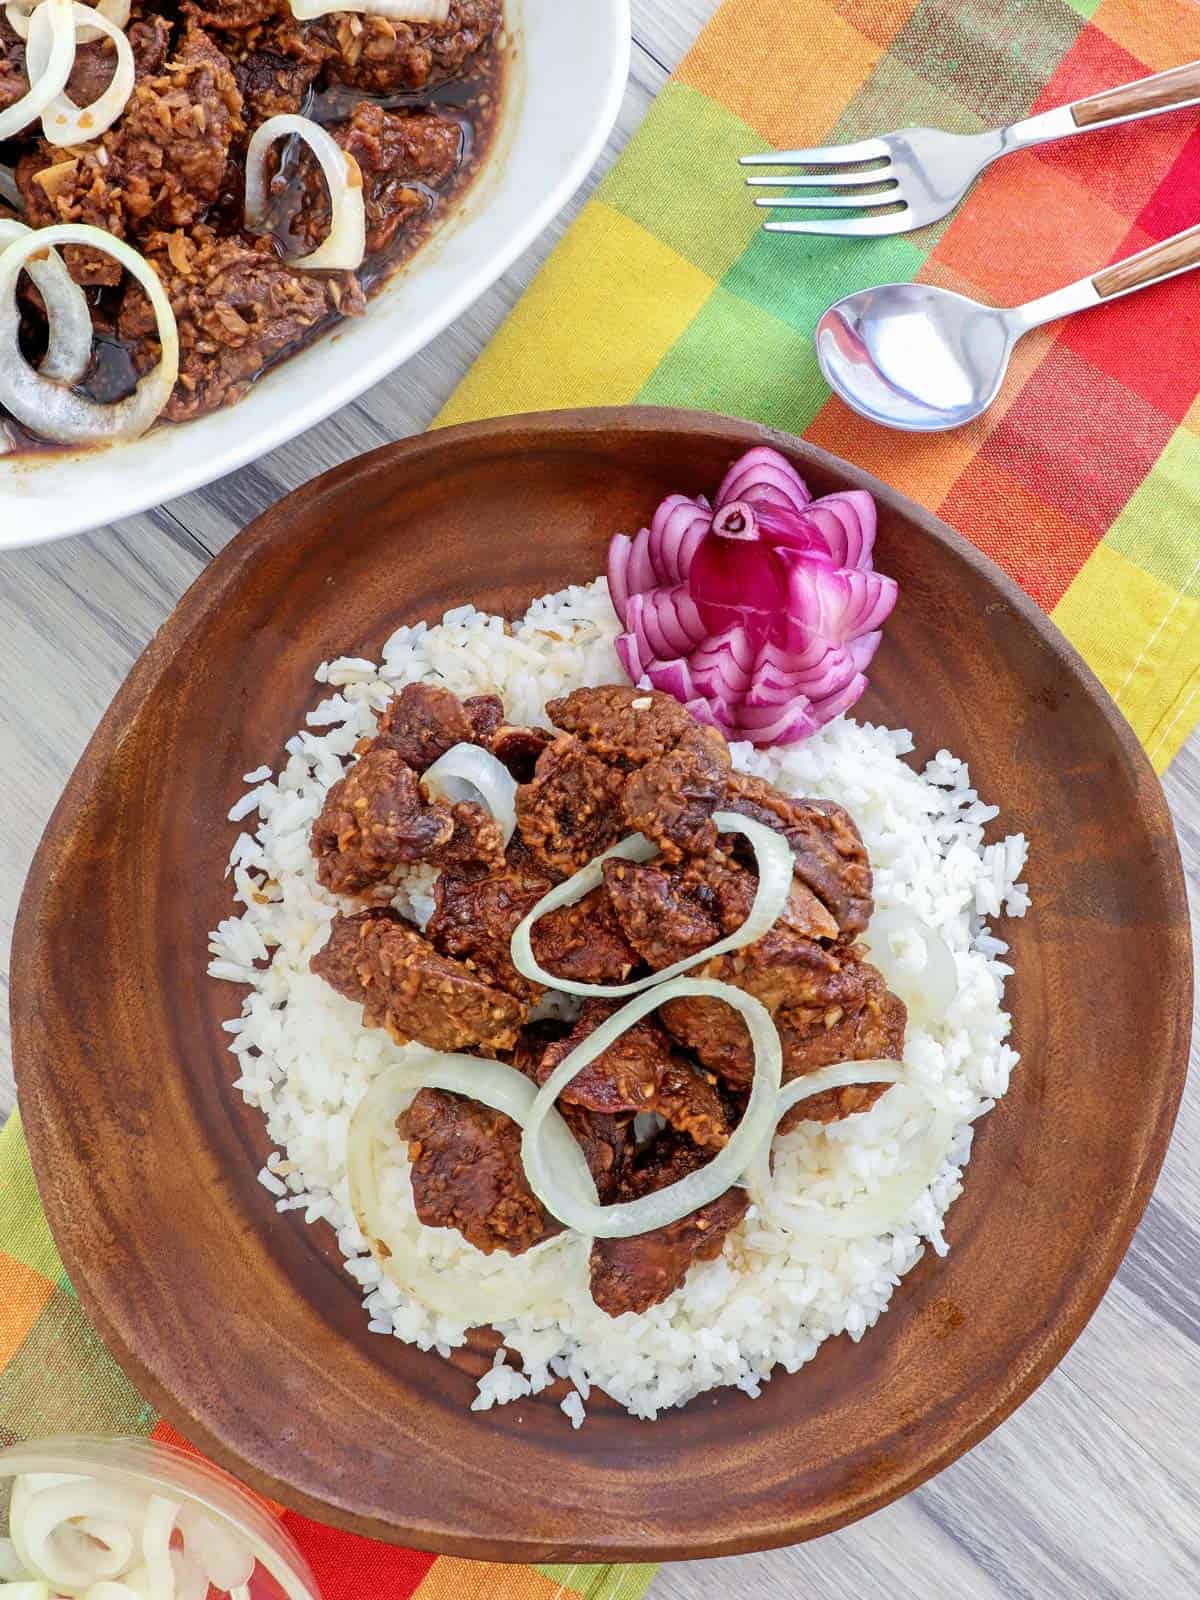 cirspy fried chicken livers with onions over rice on a wooden plate